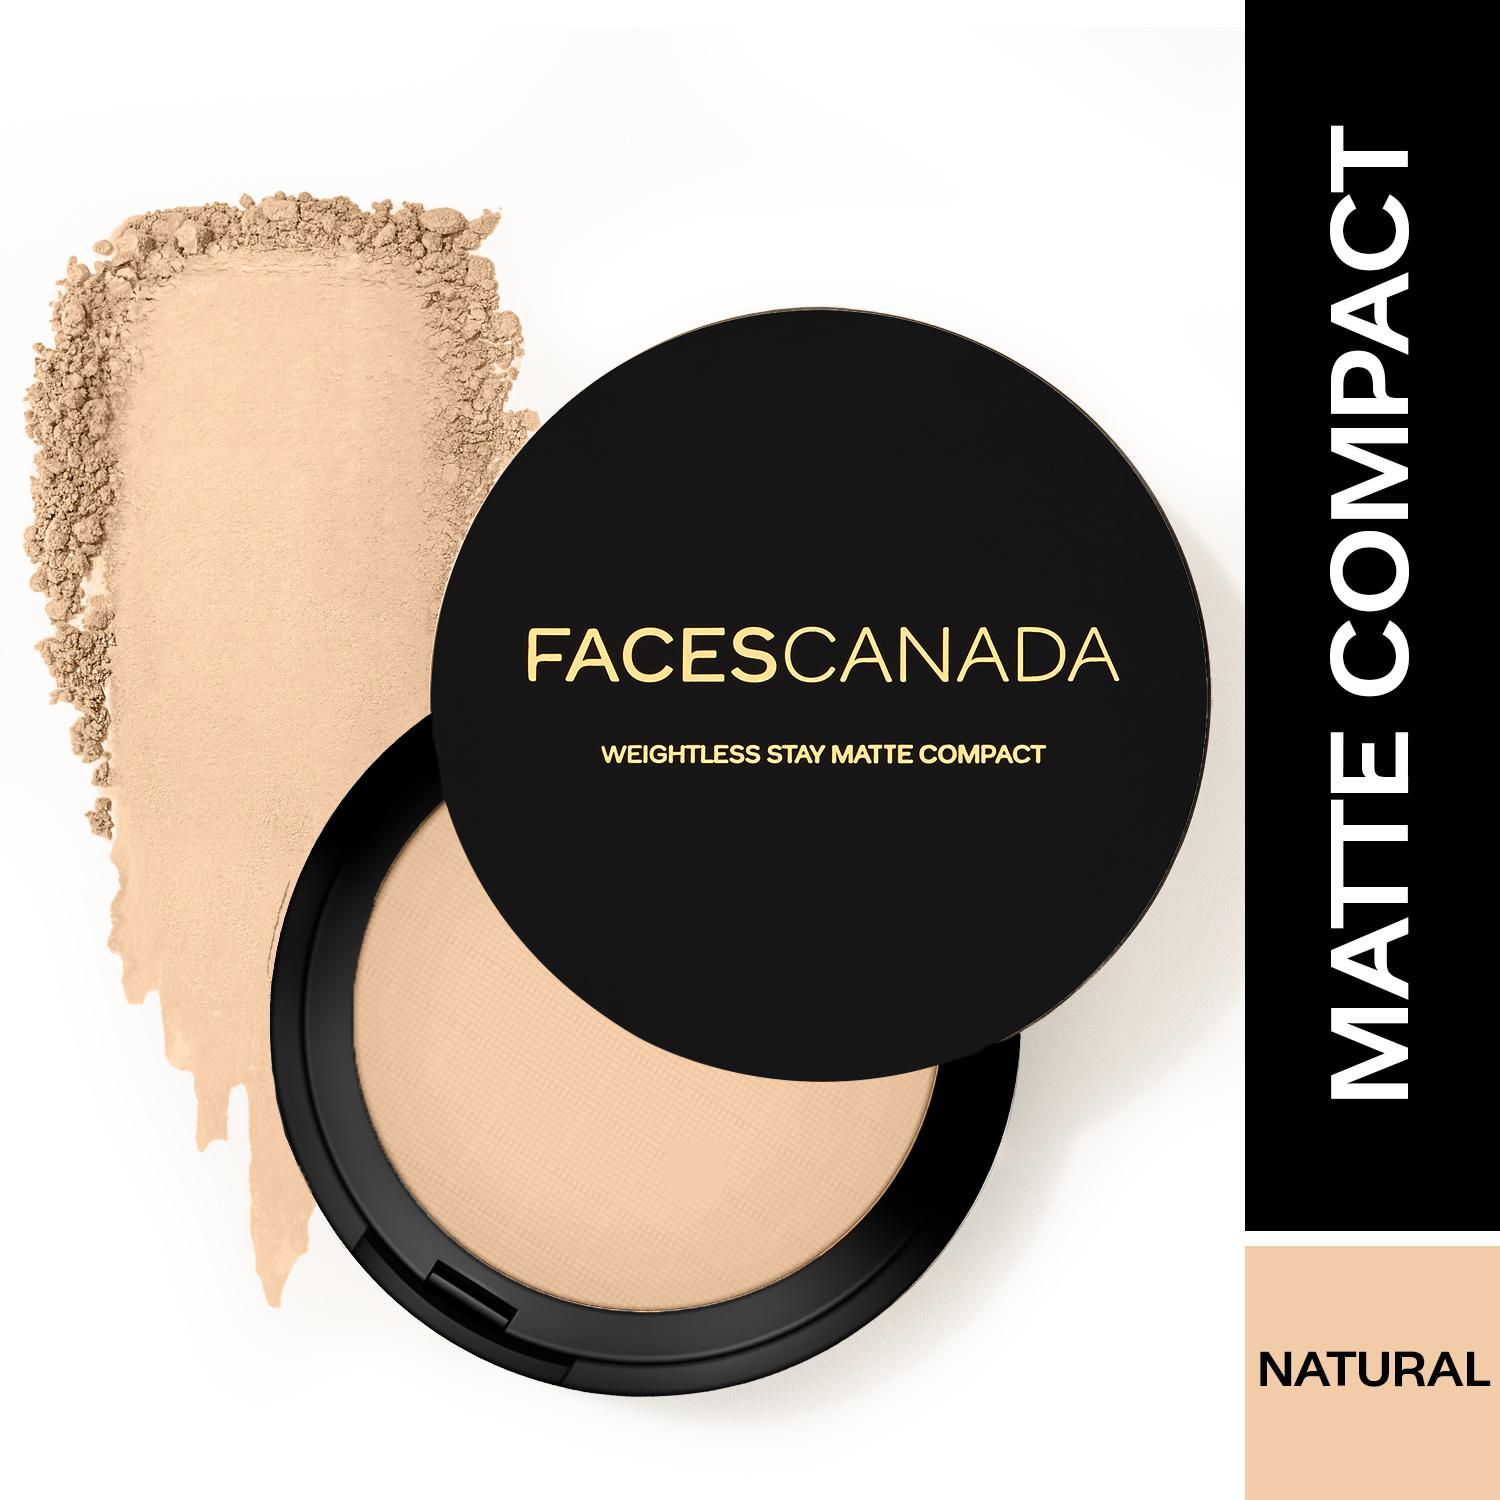 Faces Canada | Faces Canada Weightless Stay Matte Finish Compact Powder,Non Oily Matte Pressed Powder -Natural (9 g)